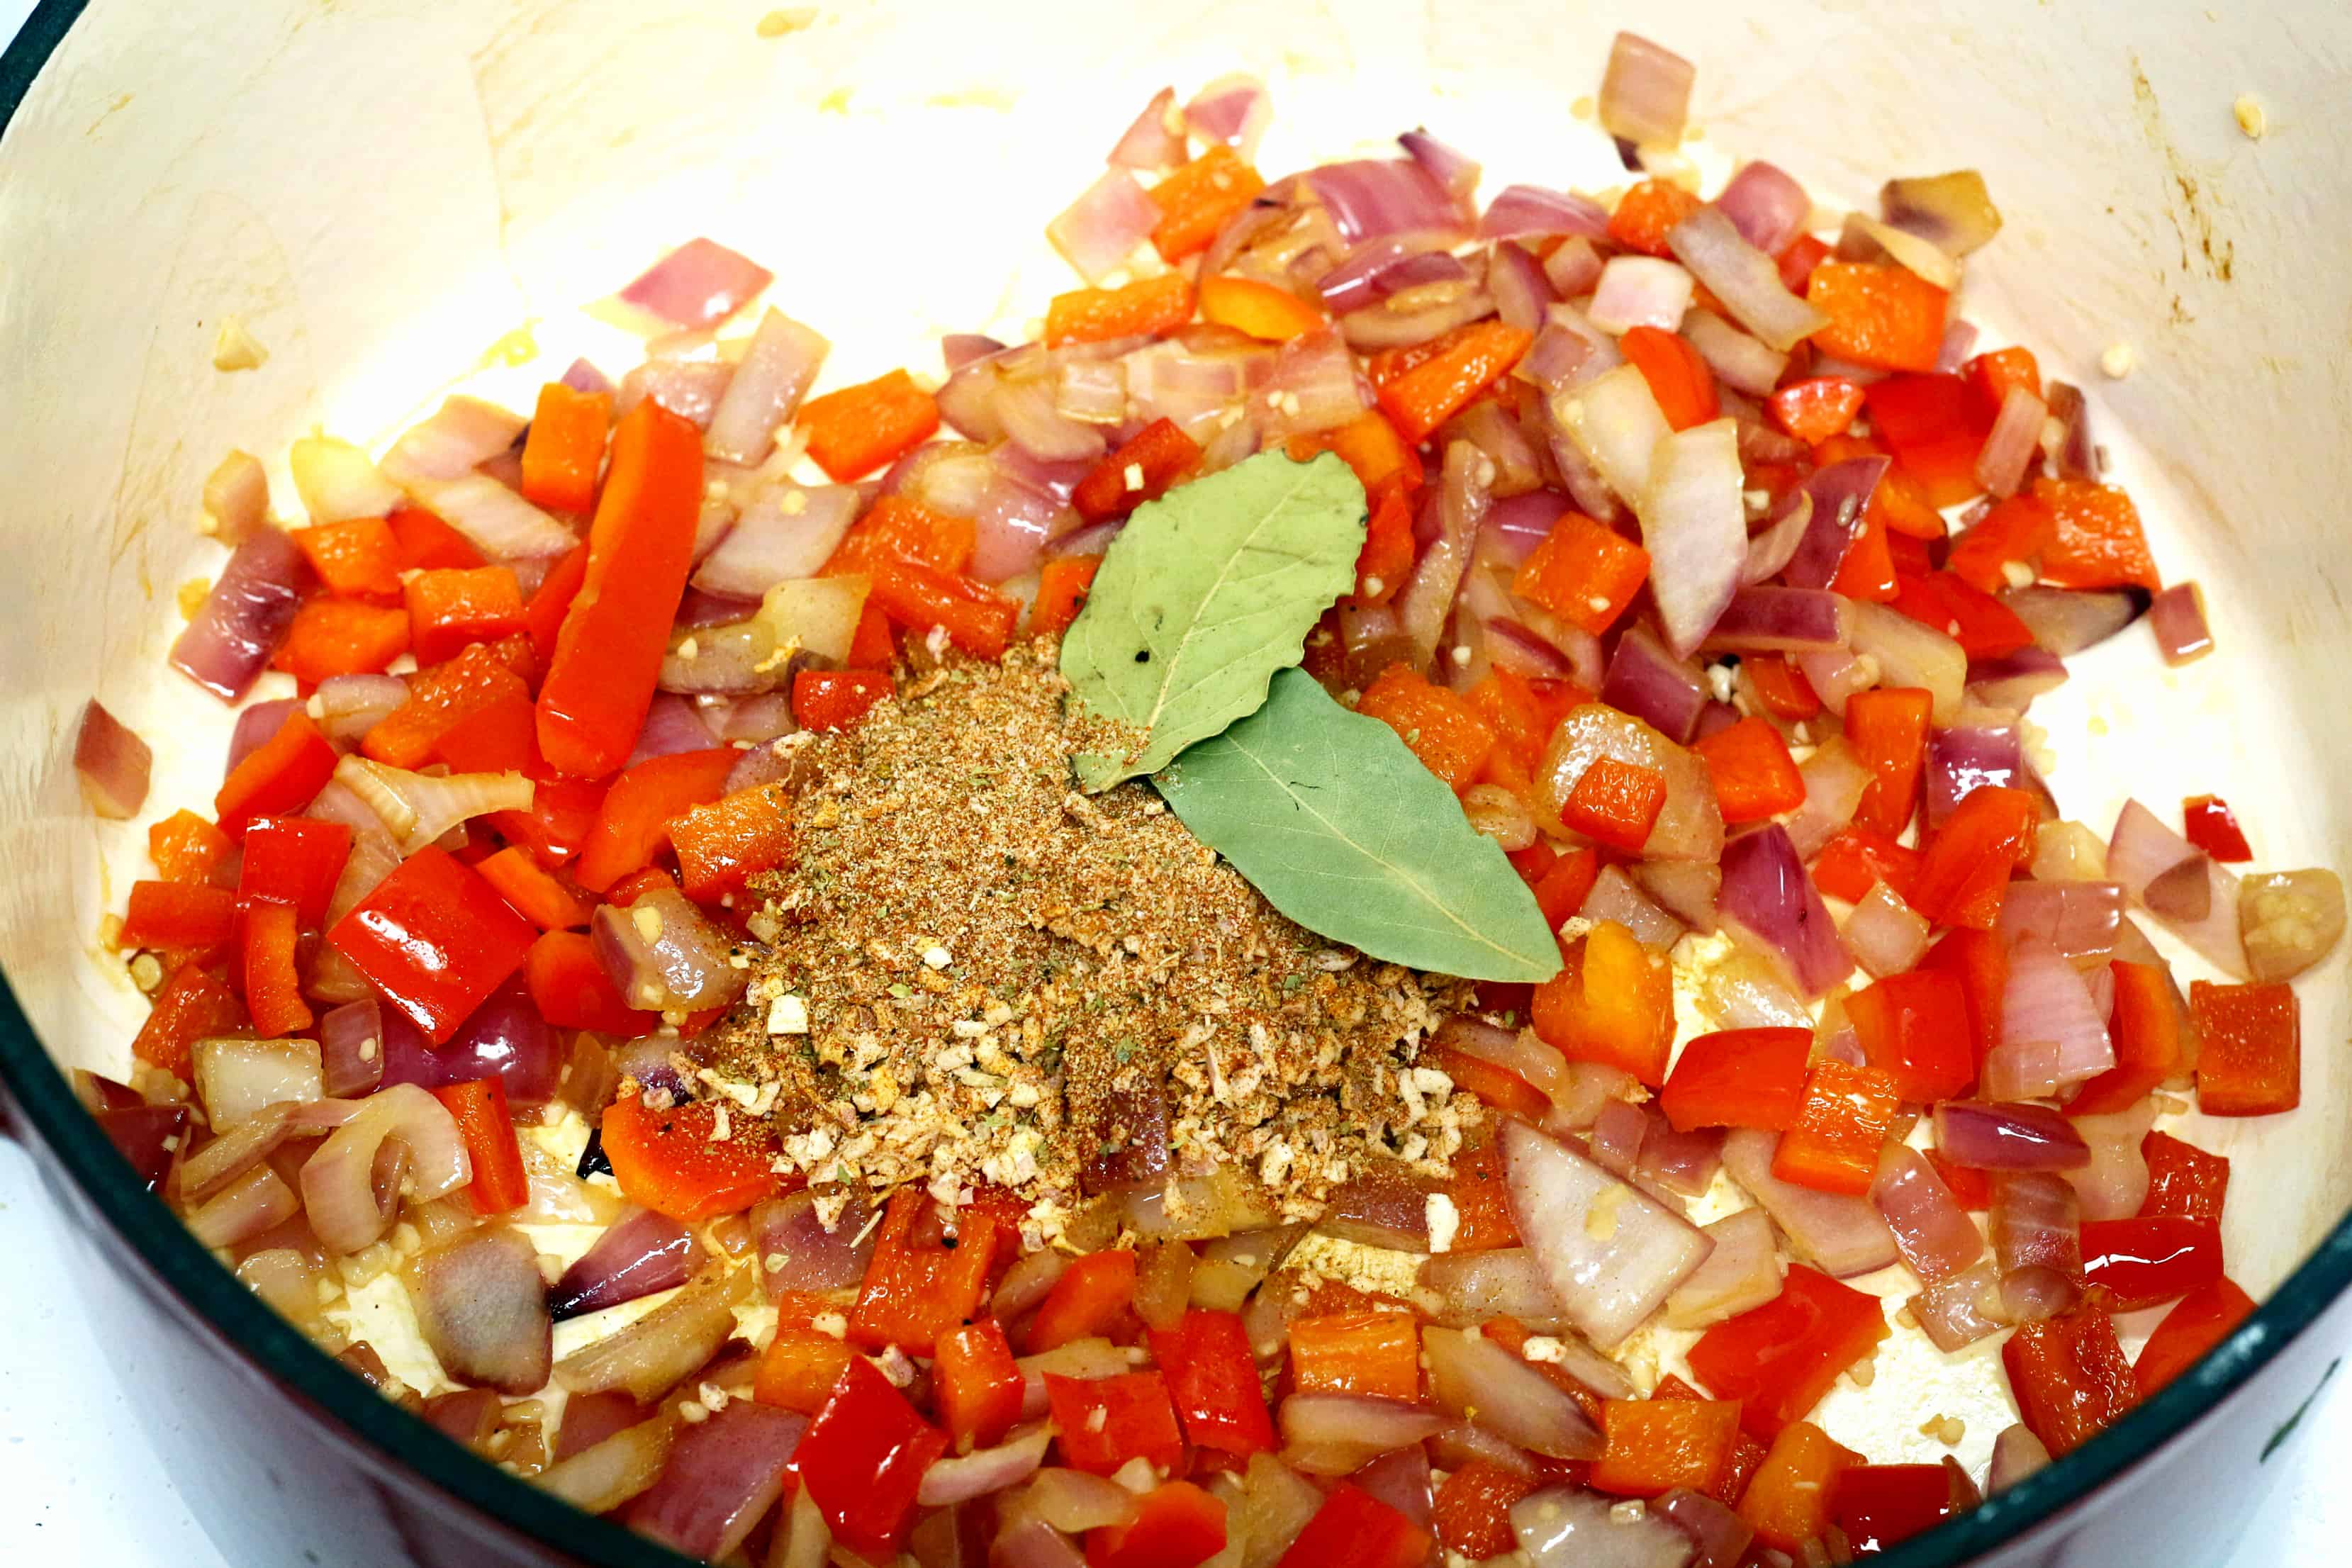 onions, peppers and spices in a pot